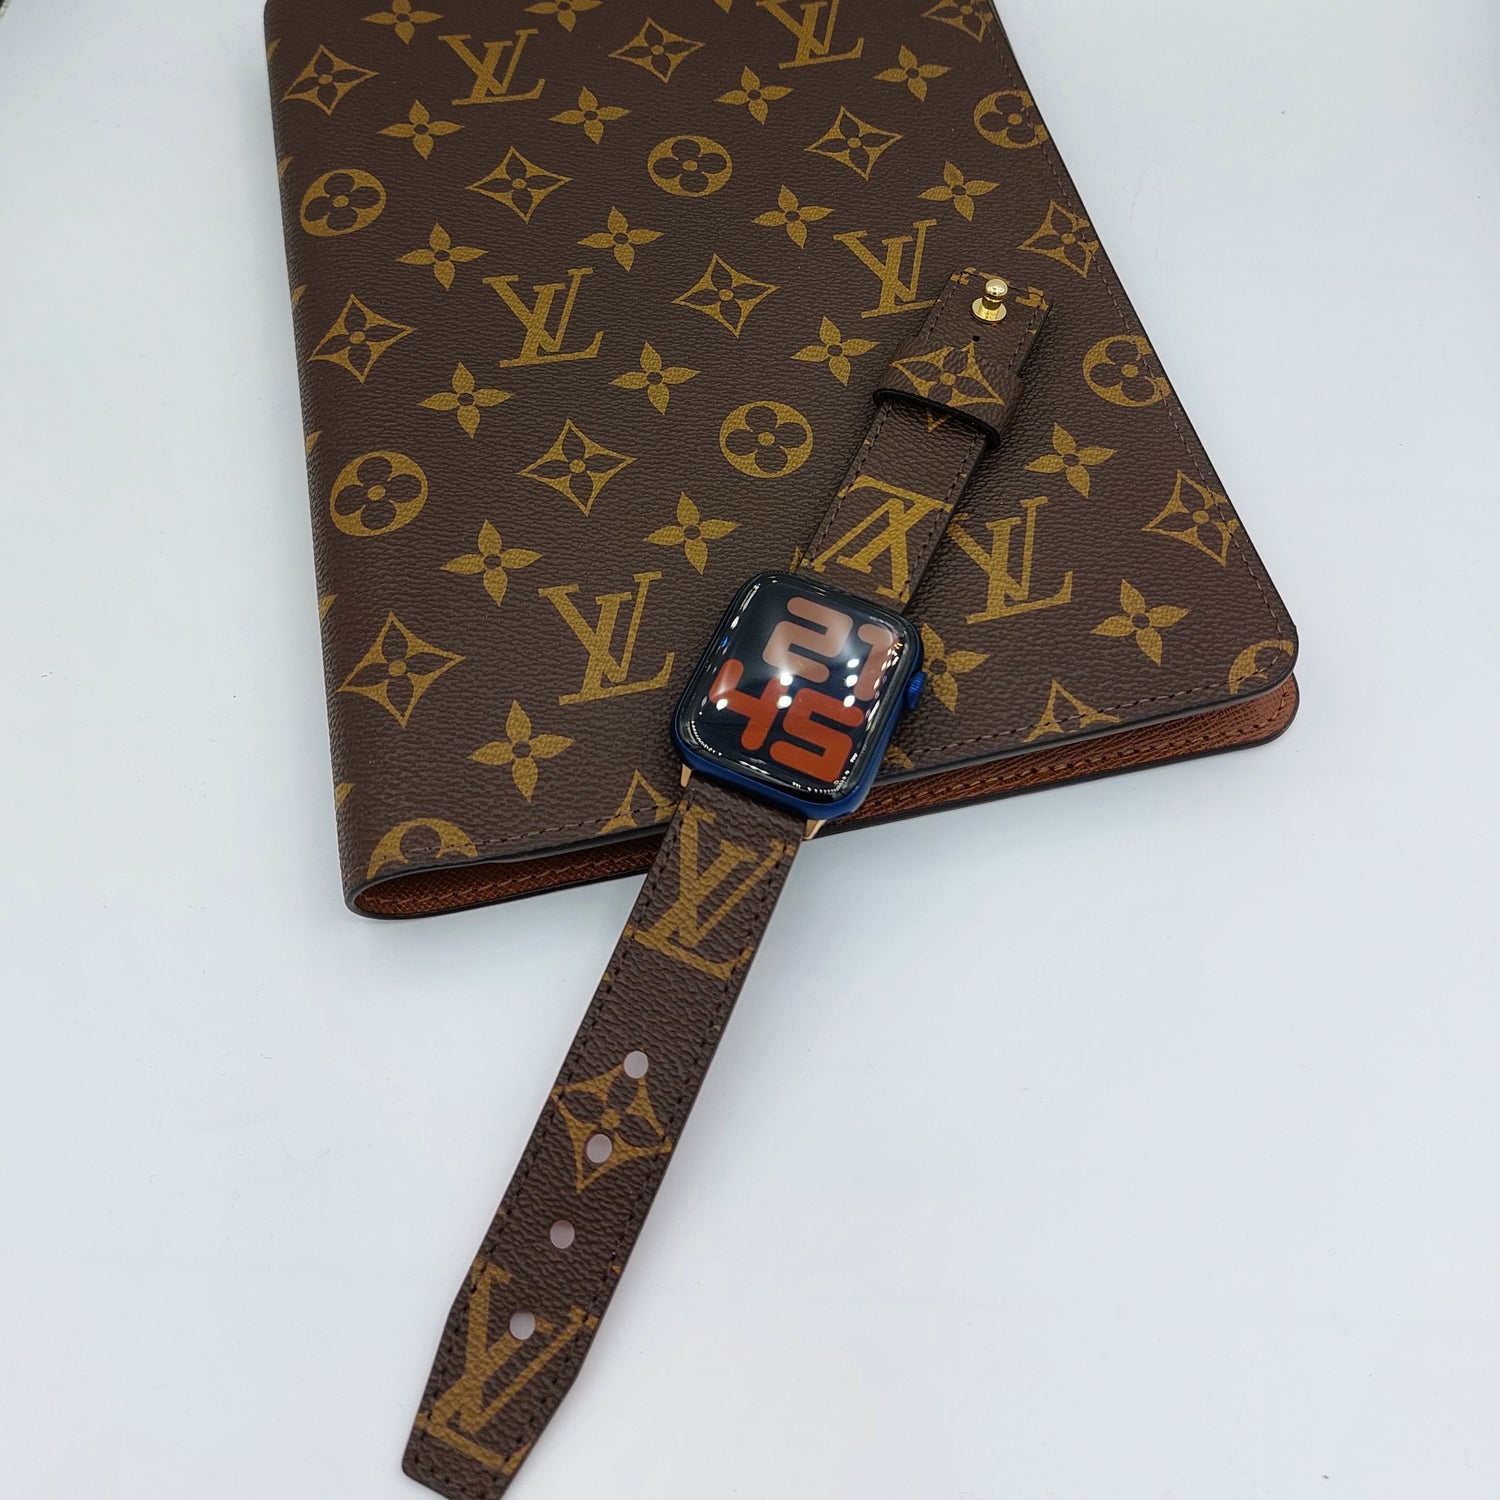 Products By Louis Vuitton: Paul Notebook Cover